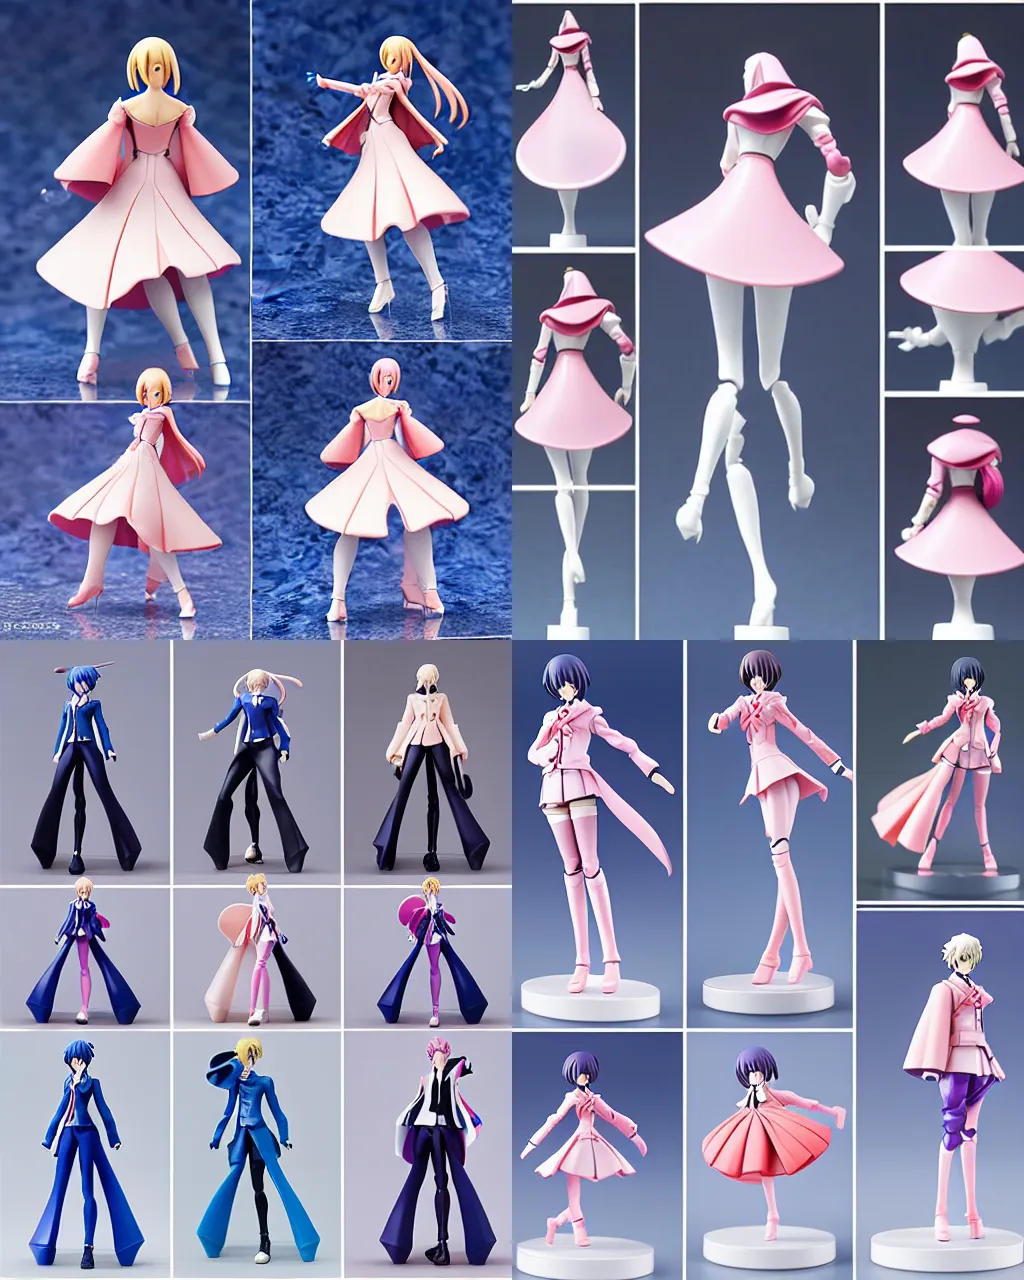 Prompt: anime figma figure collection ball shaped accordion sleeve haute couture, sailor uniform, coat, synthetic curves striking pose, dynamic folds, cute pockets, volume flutter, youthful, modeled by modern designer bust, body fit, award fashion, picton blue, petal pink gradient scheme, holographic tones, expert composition, professional retouch, editorial photography